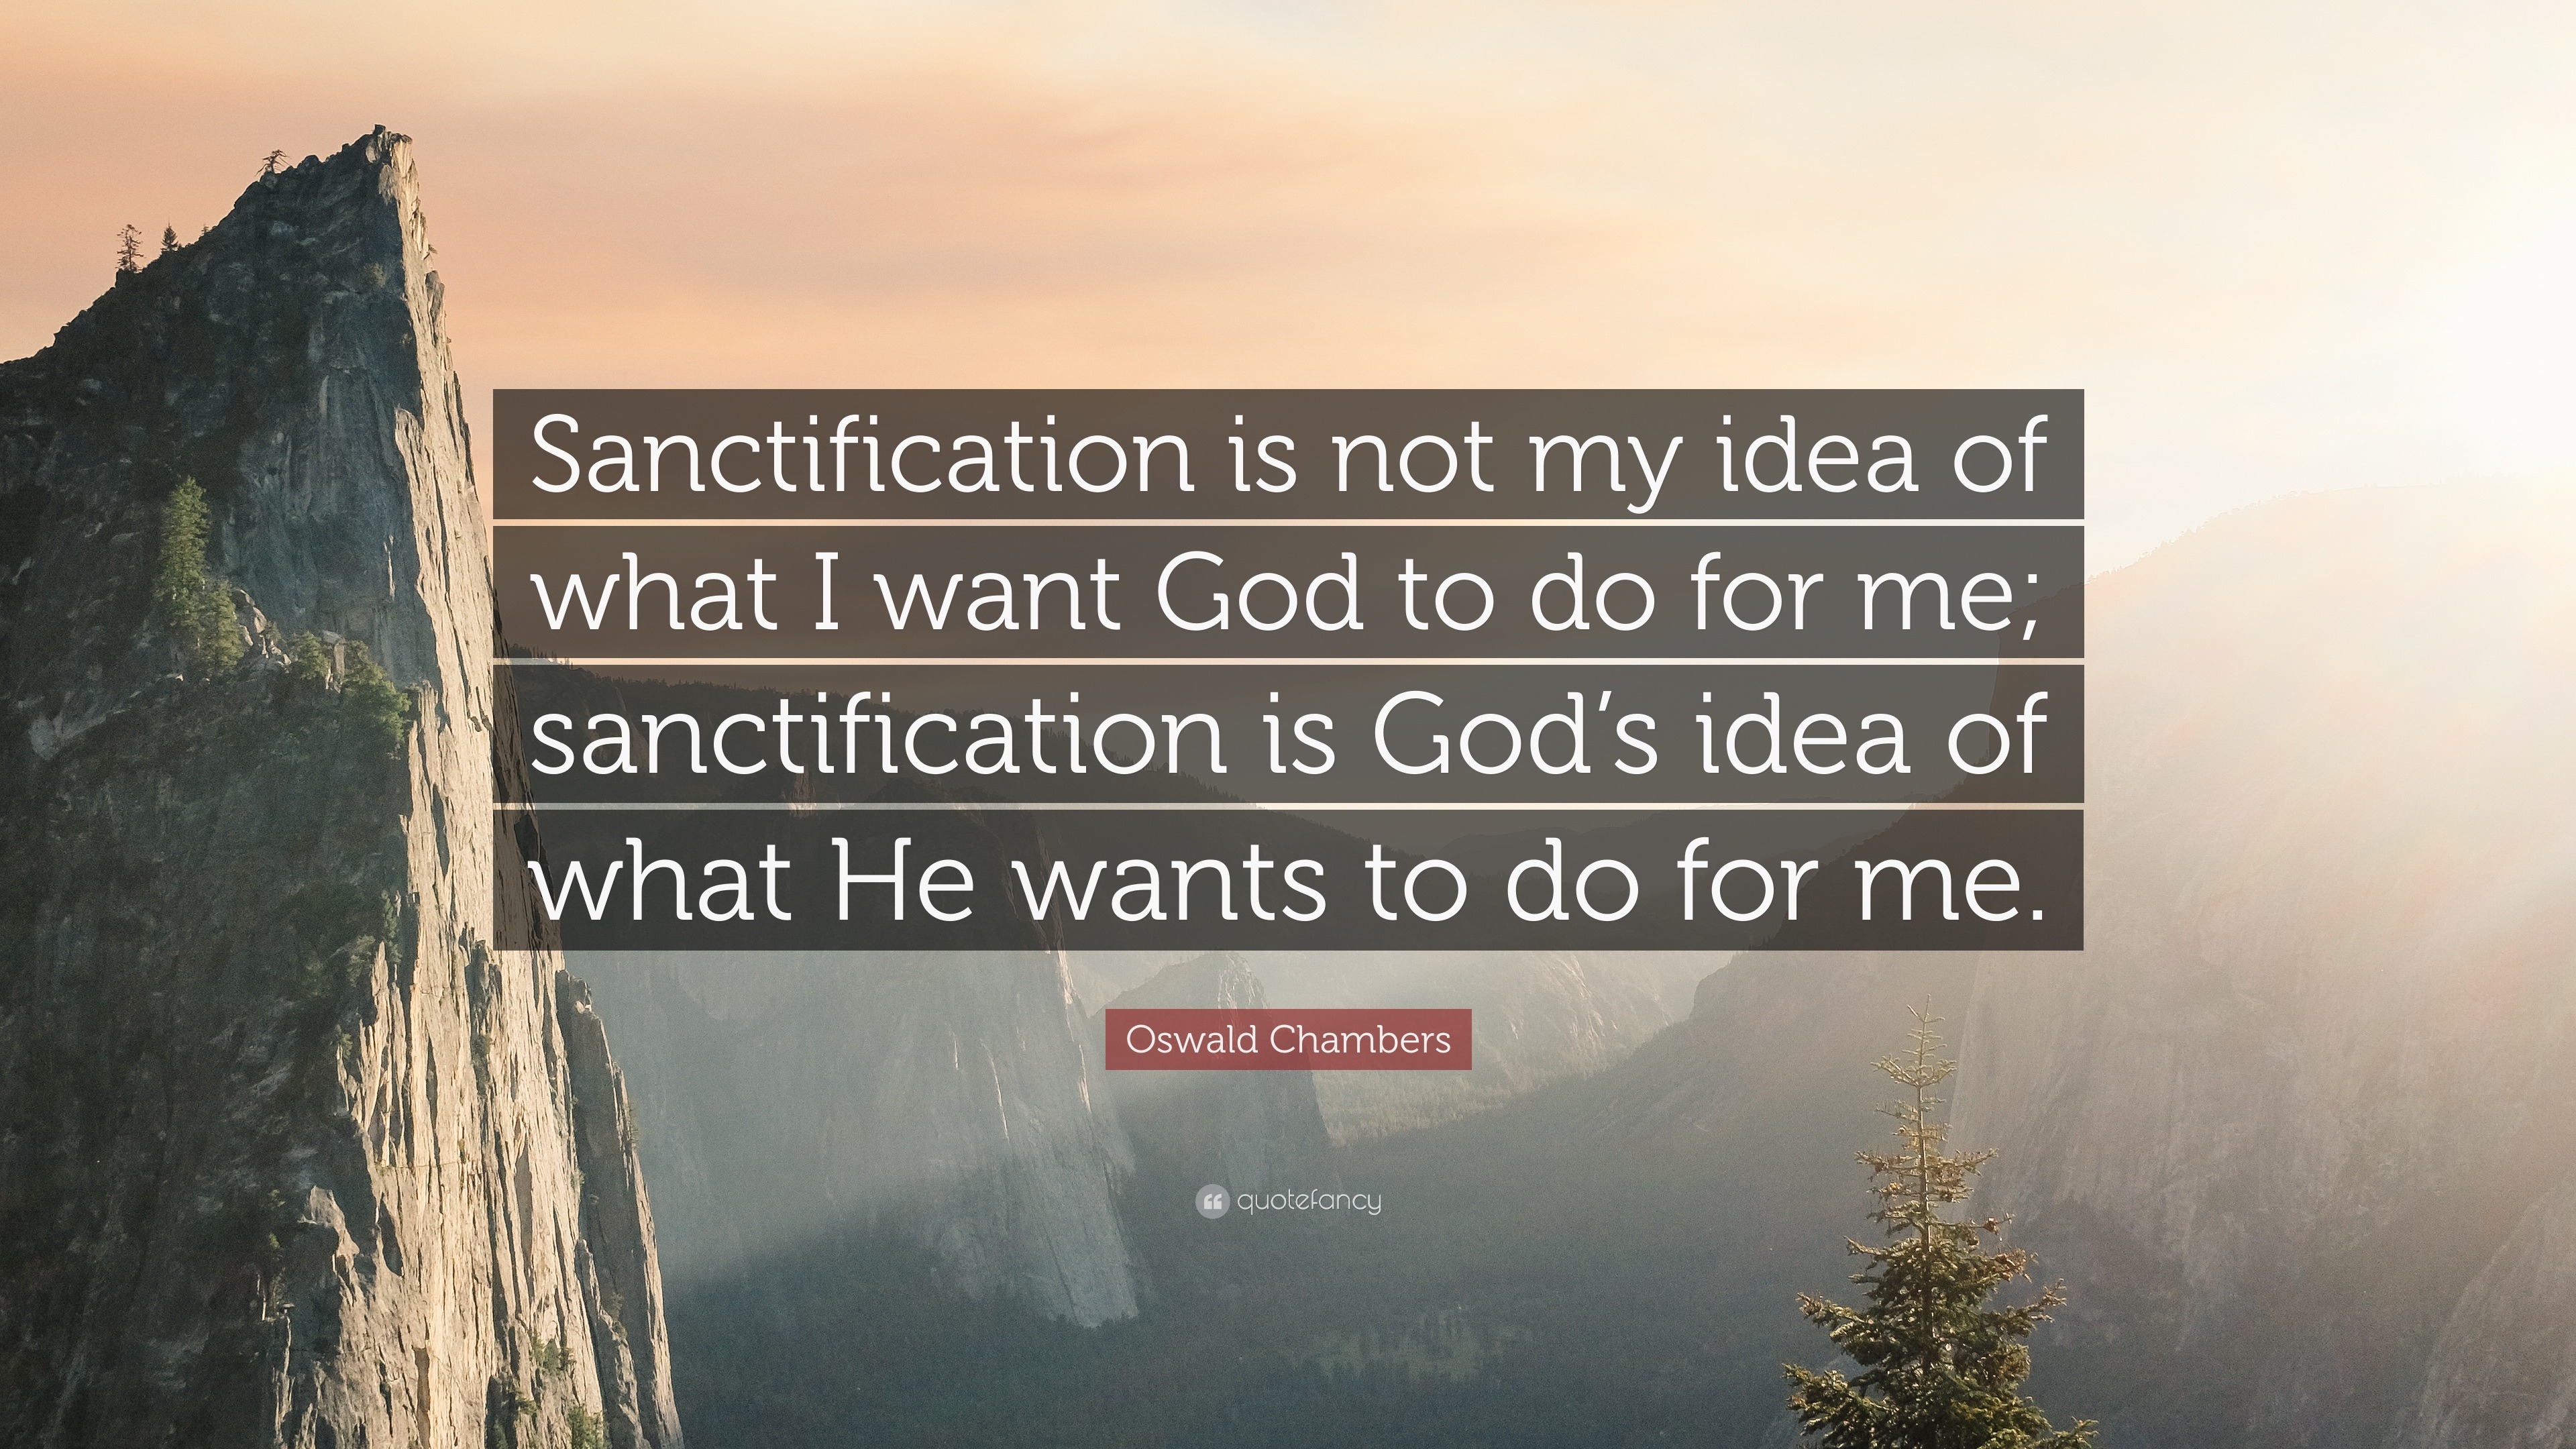 109516 Oswald Chambers Quote Sanctification is not my idea of what I want